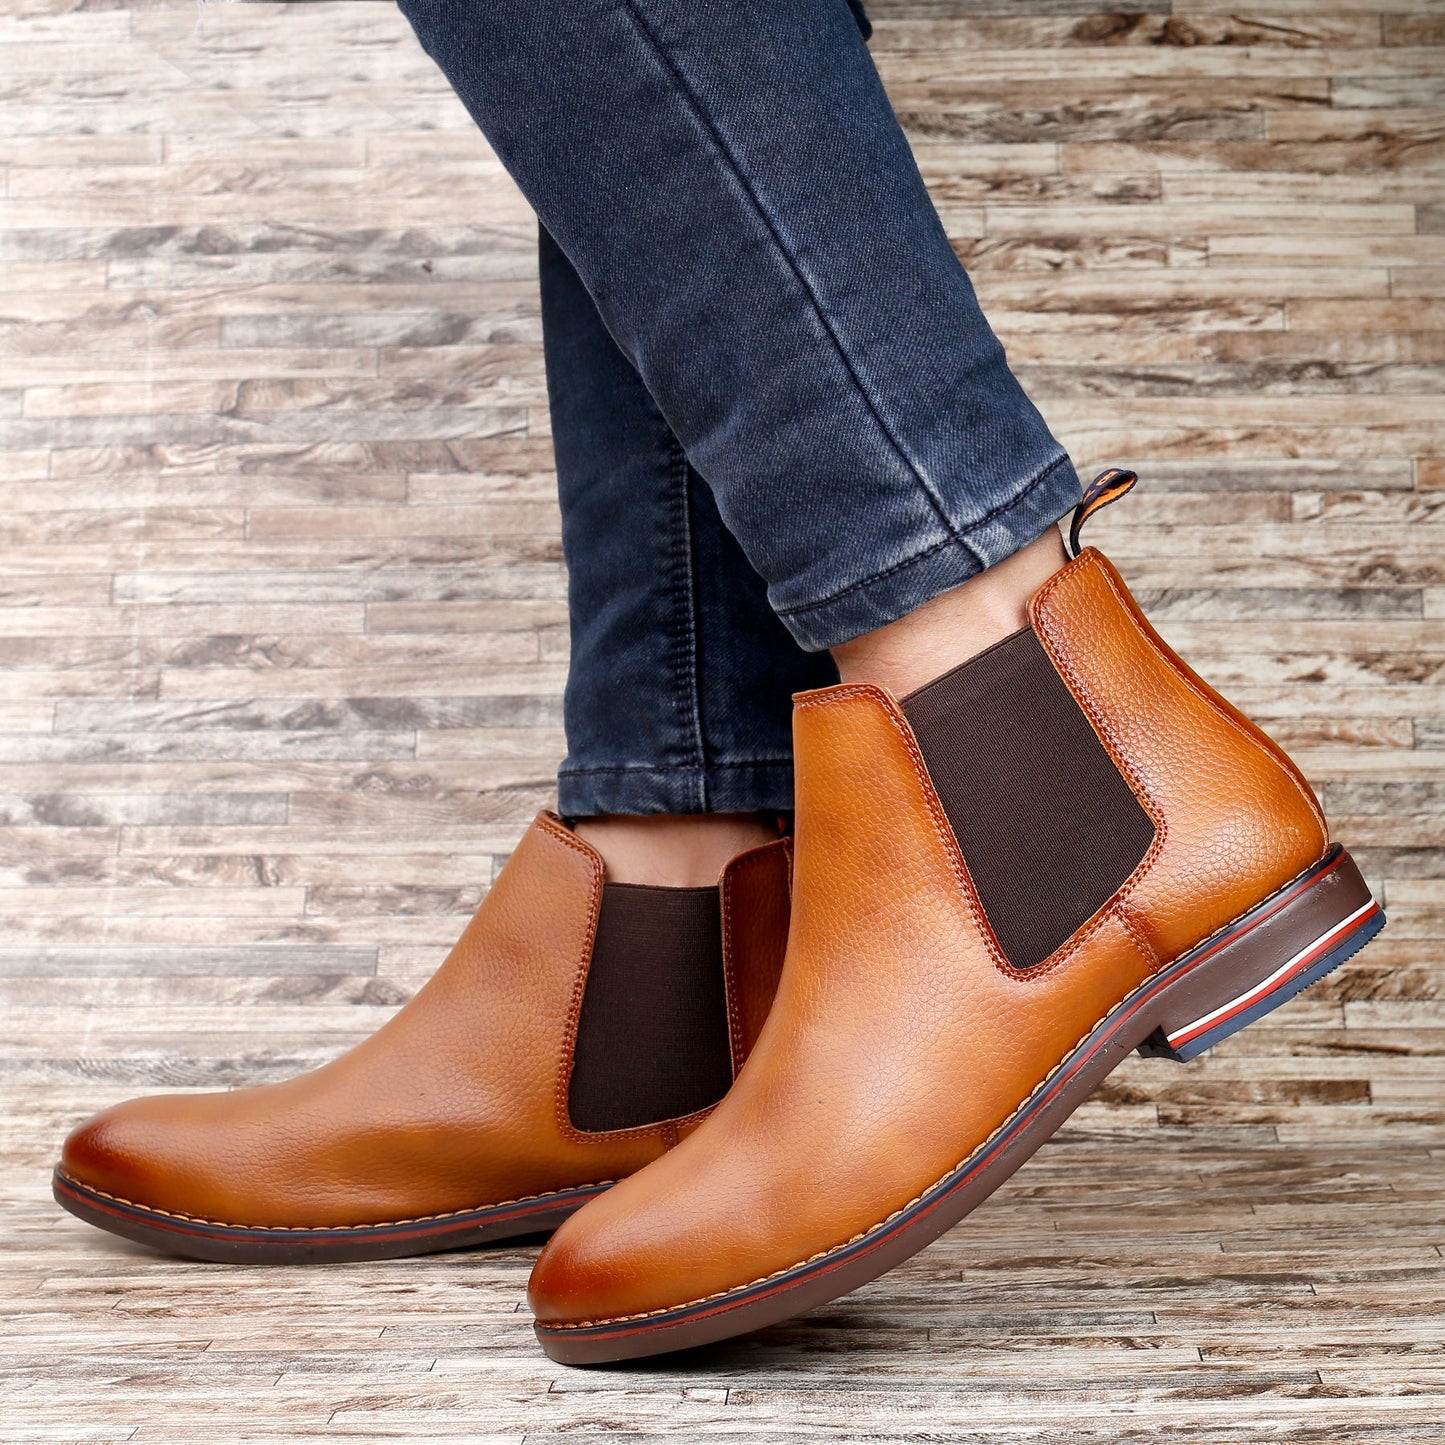 New Chelsea Tan Boot For Men Party And Casual Wear -JackMarc